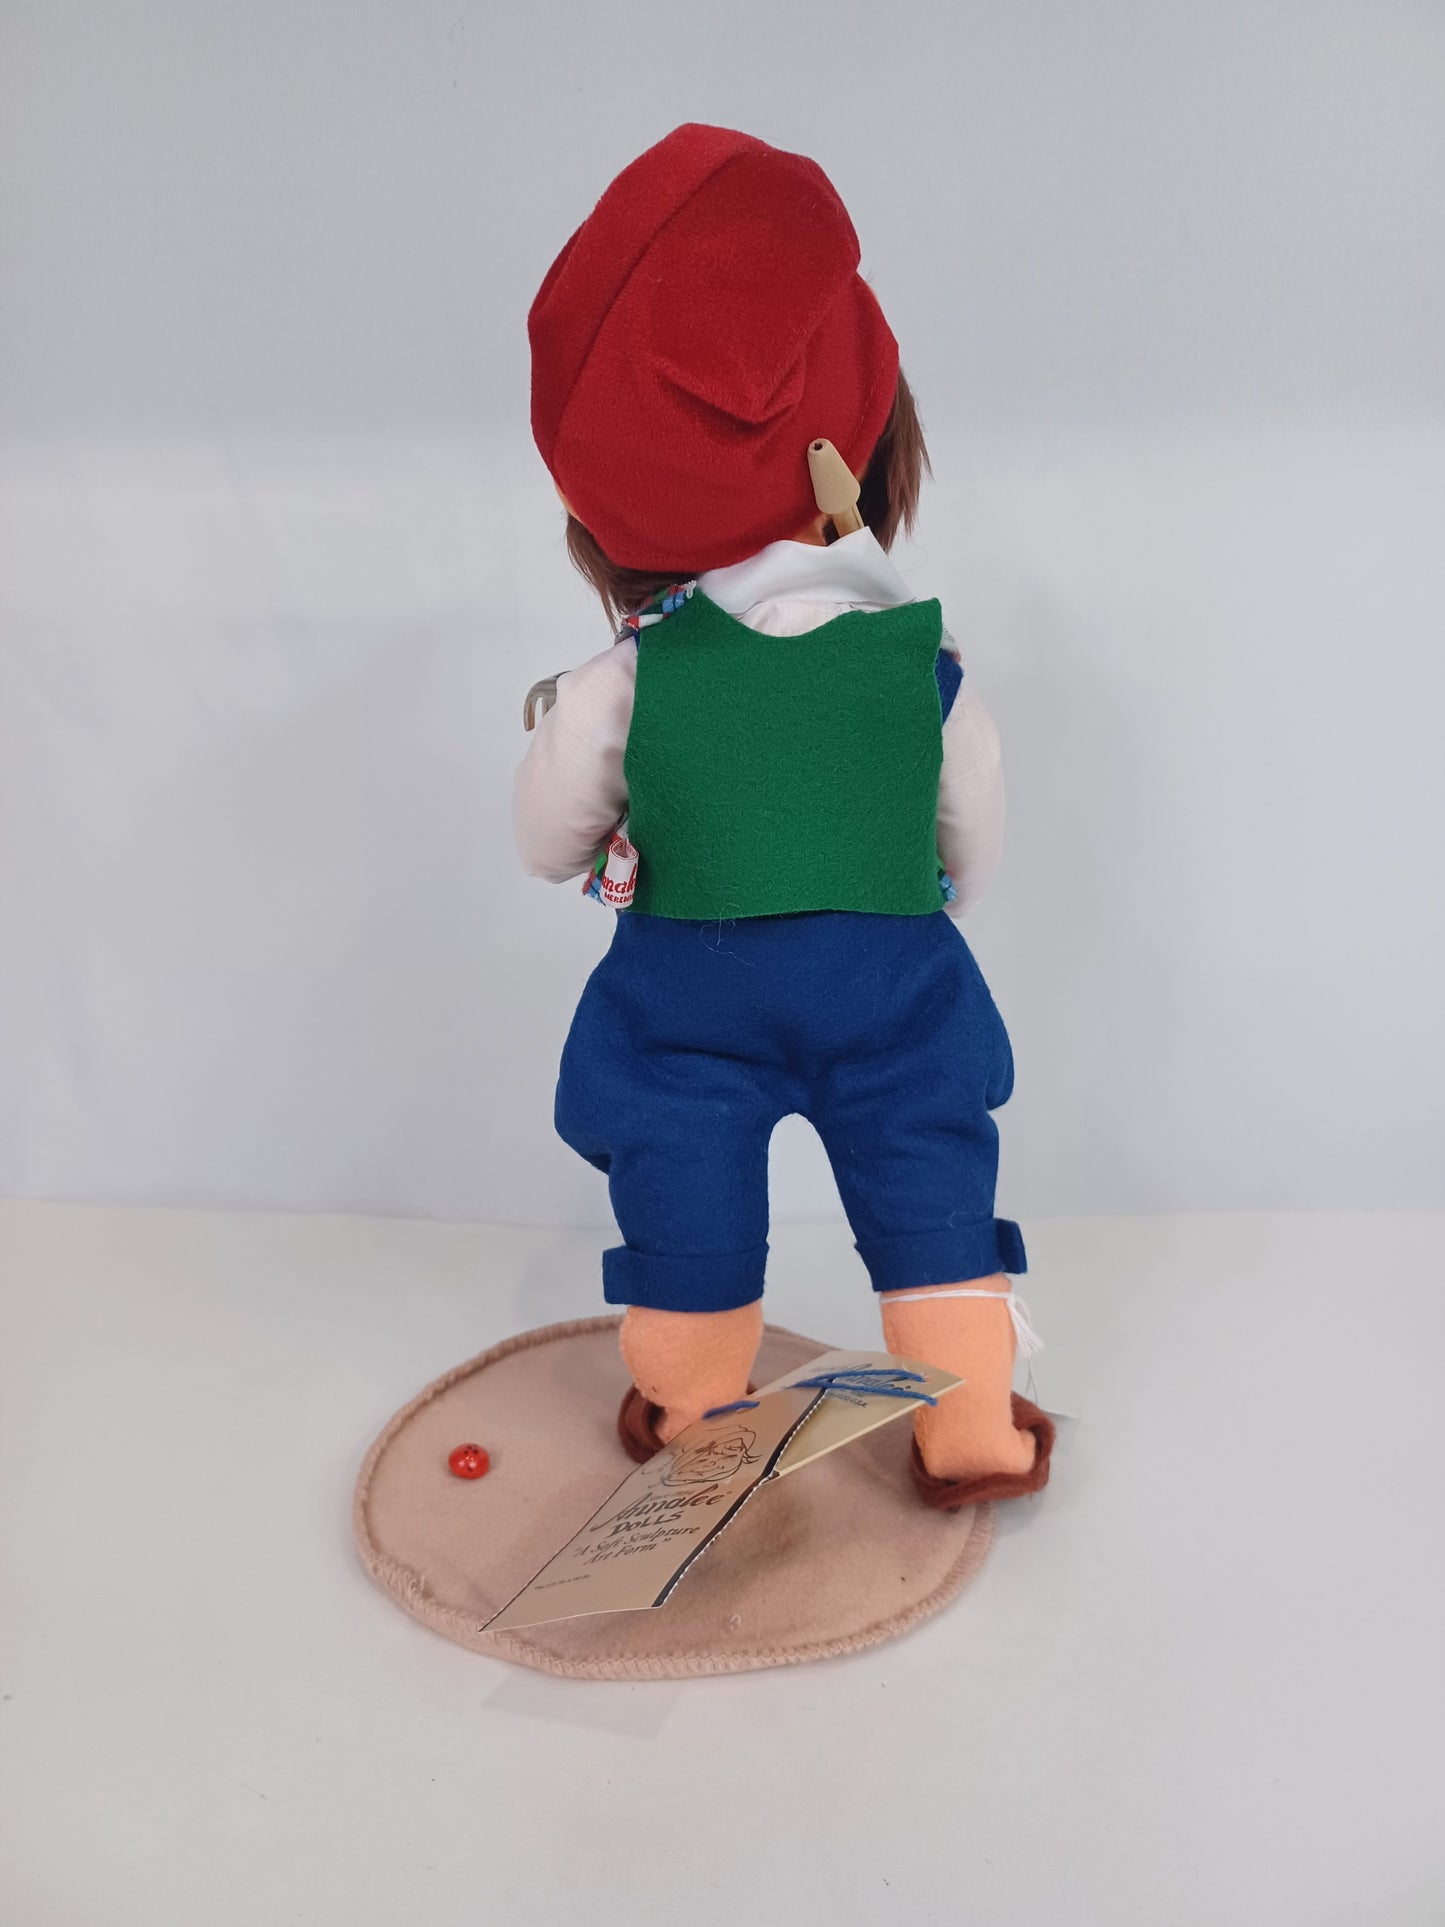 12" Workshop Gnome Holding Sailboat 736998 Annalee